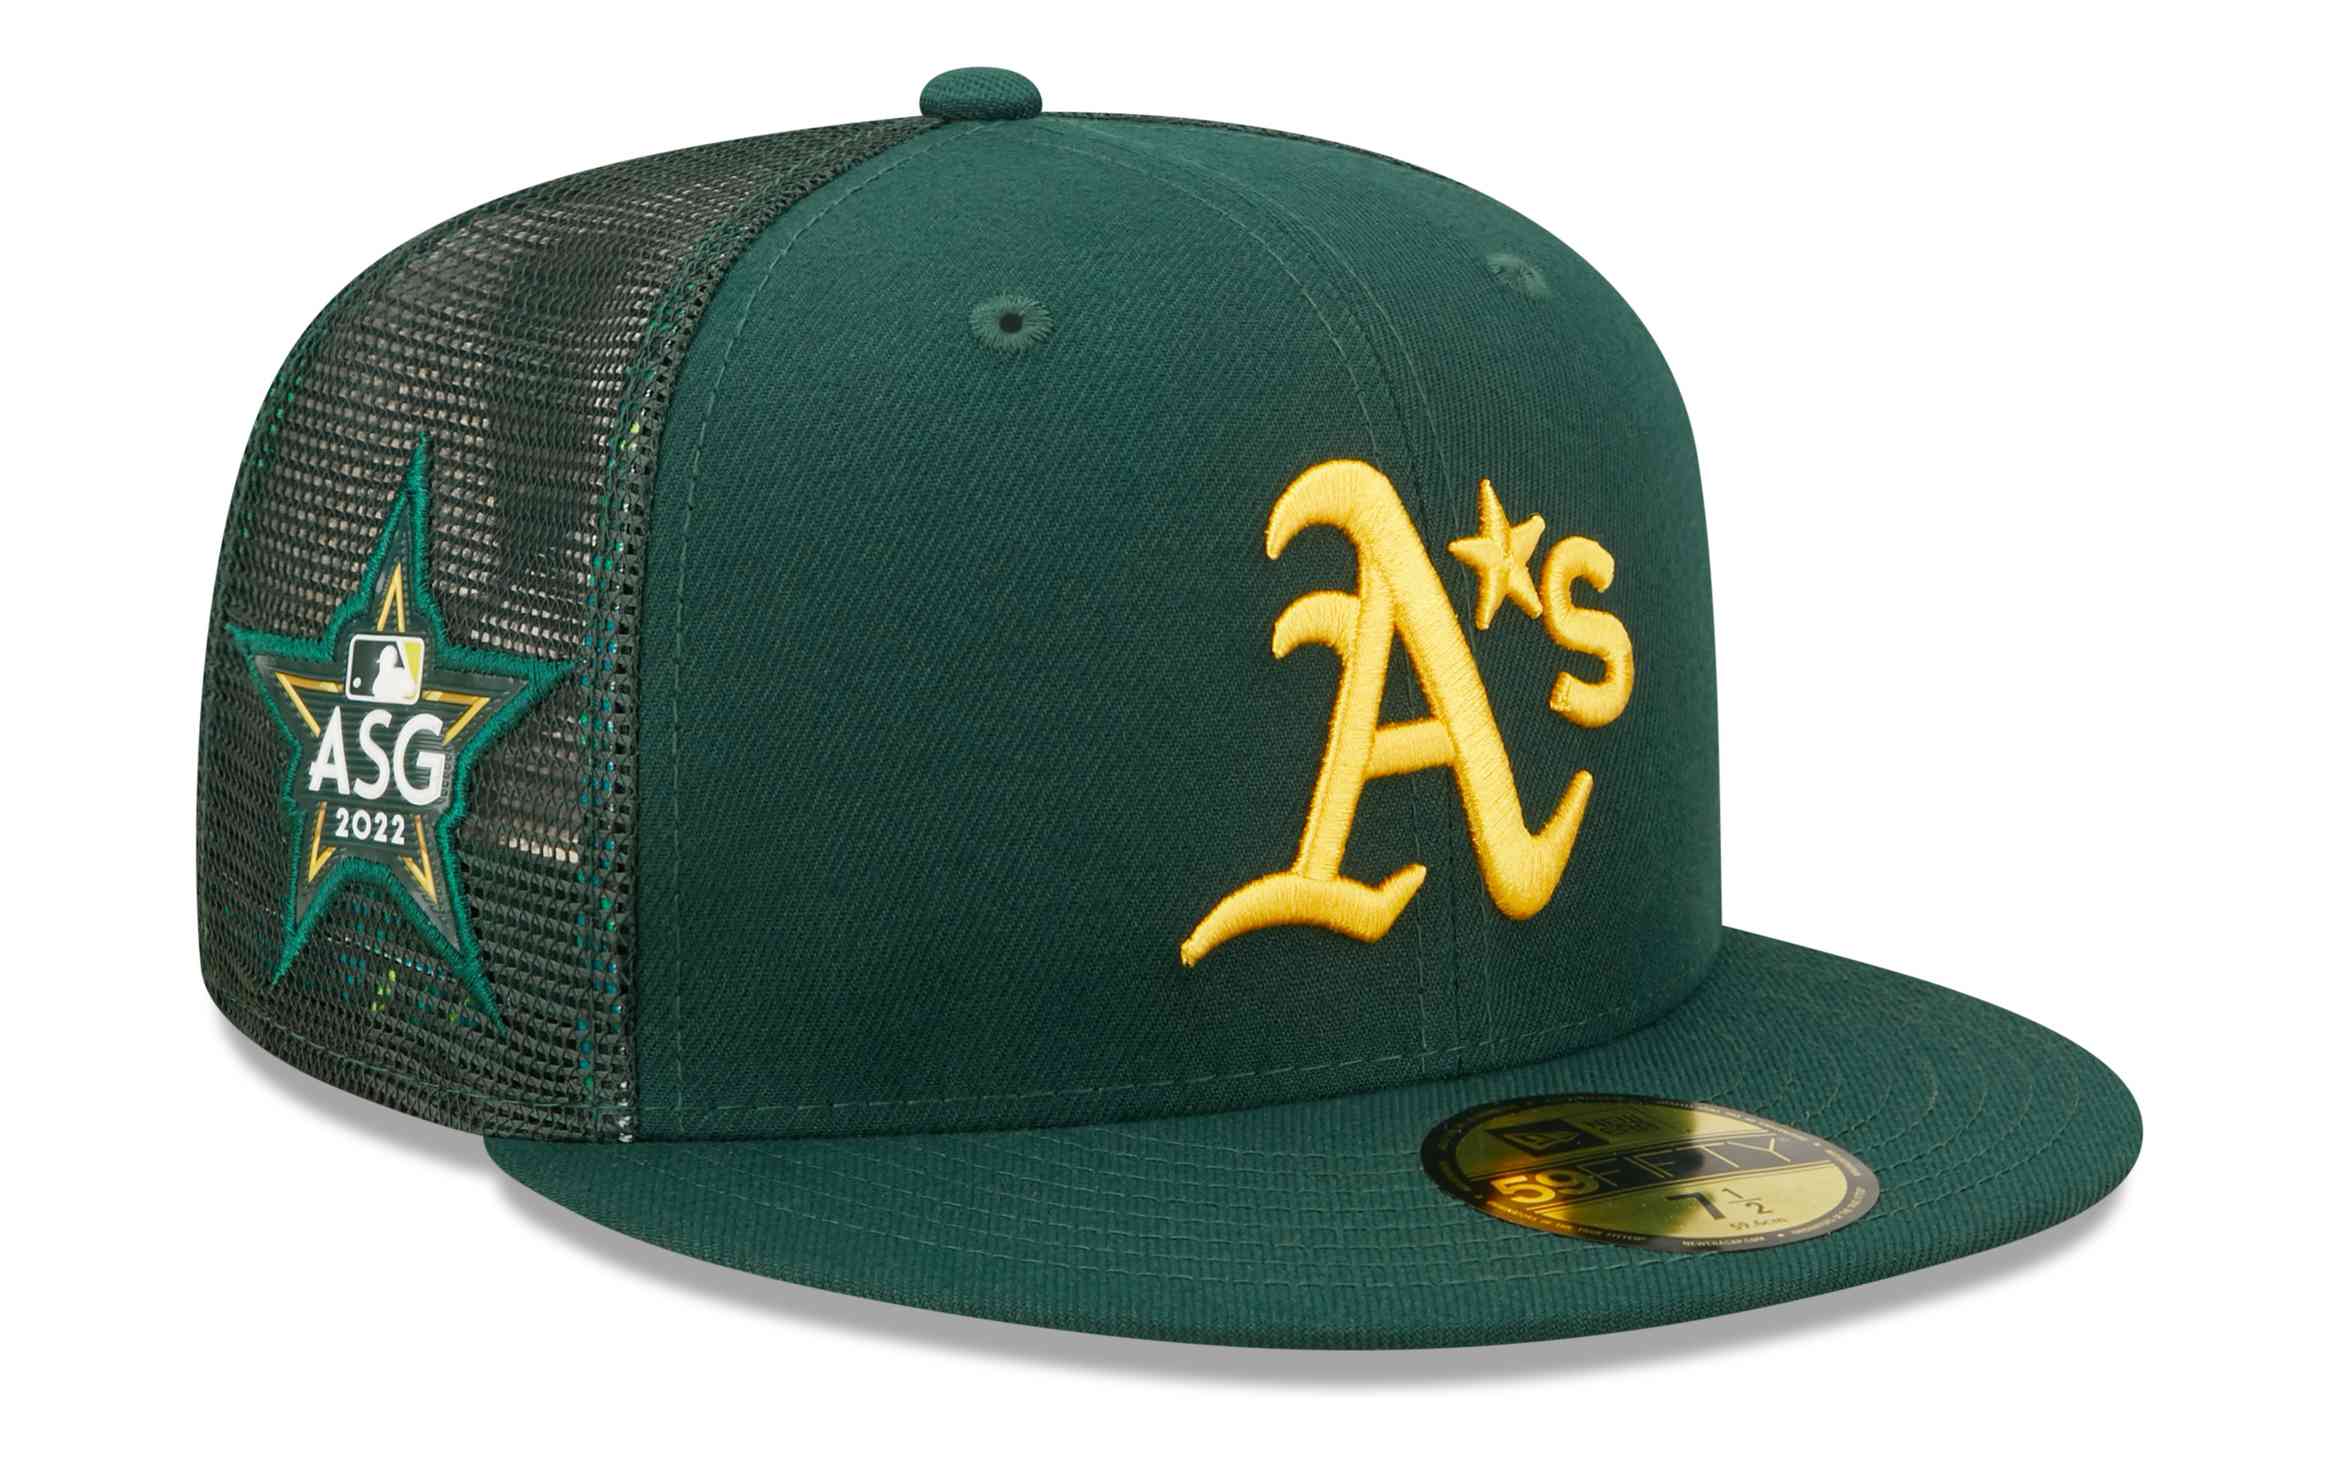 New Era - MLB Oakland Athletics 2022 All Star Game Workout 59Fifty Fitted Cap